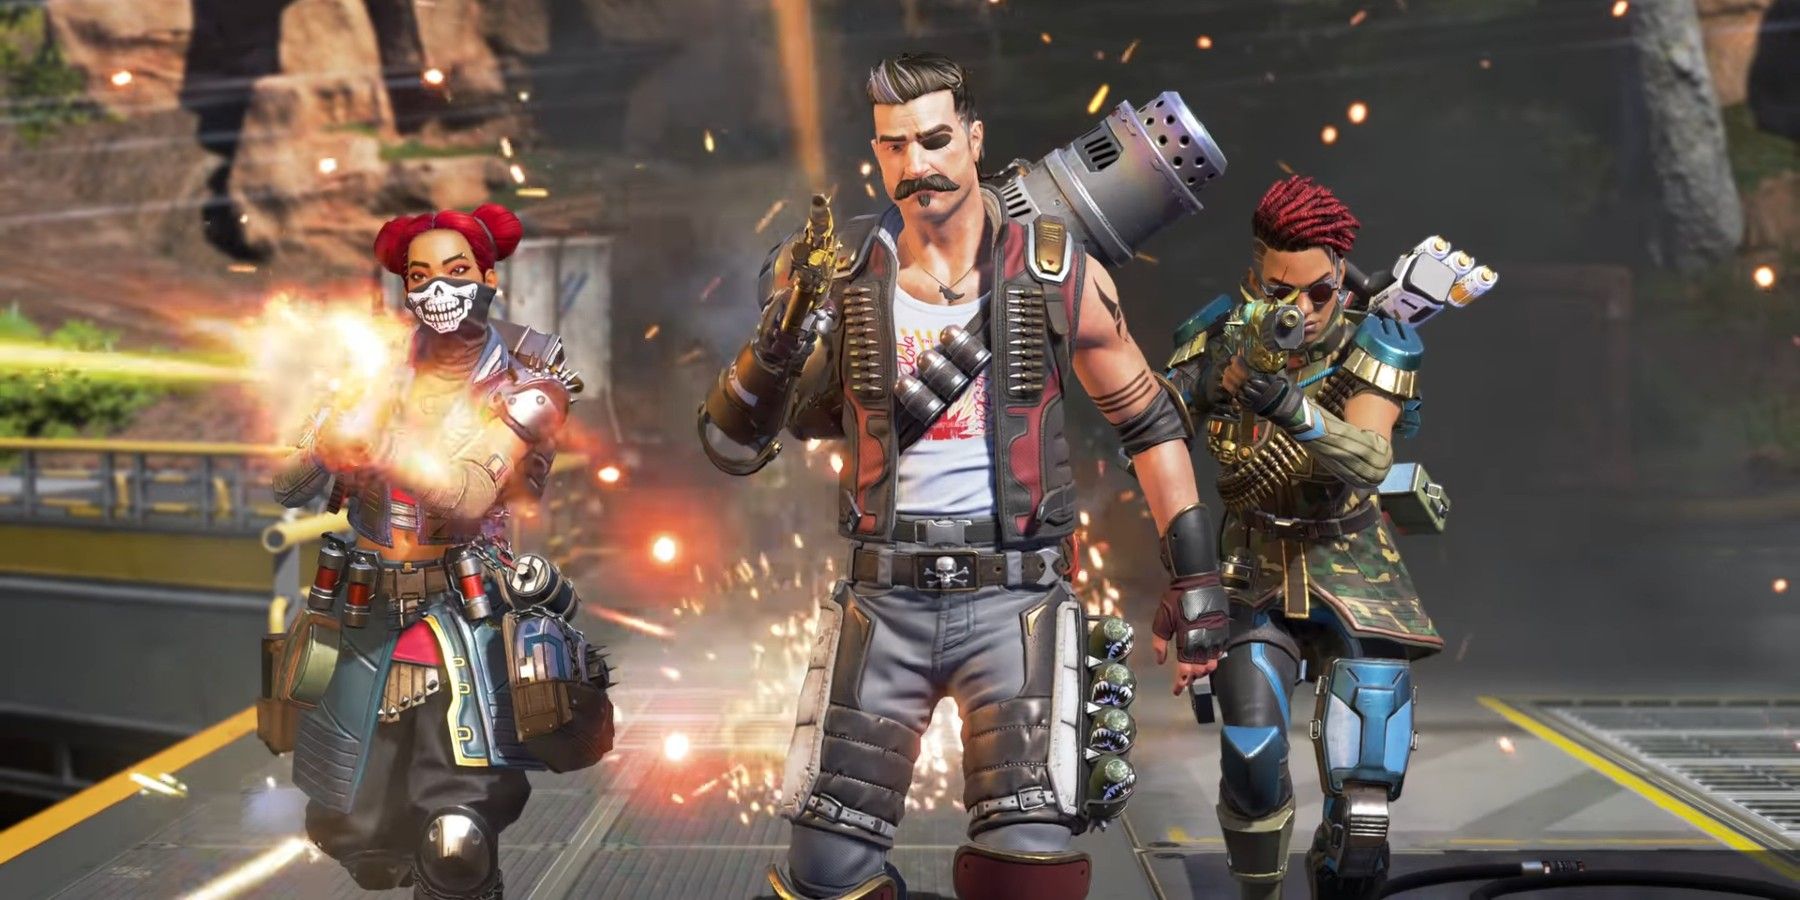 Apex Legends Could Add Domination-type Game Mode In Season 12 According to Leaker